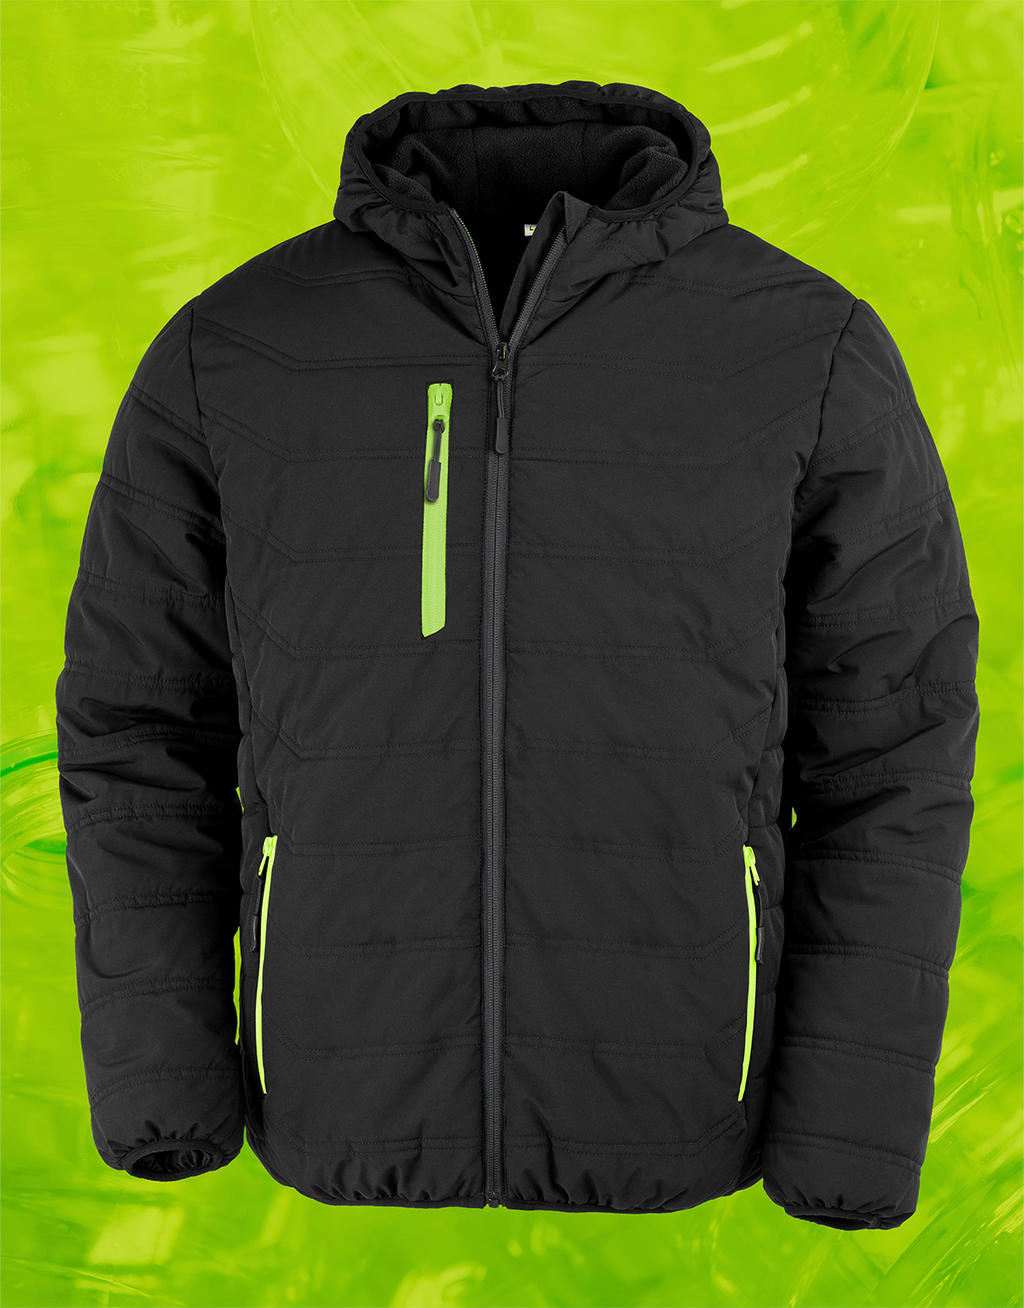  Black Compass Padded Winter Jacket in Farbe Black/Lime